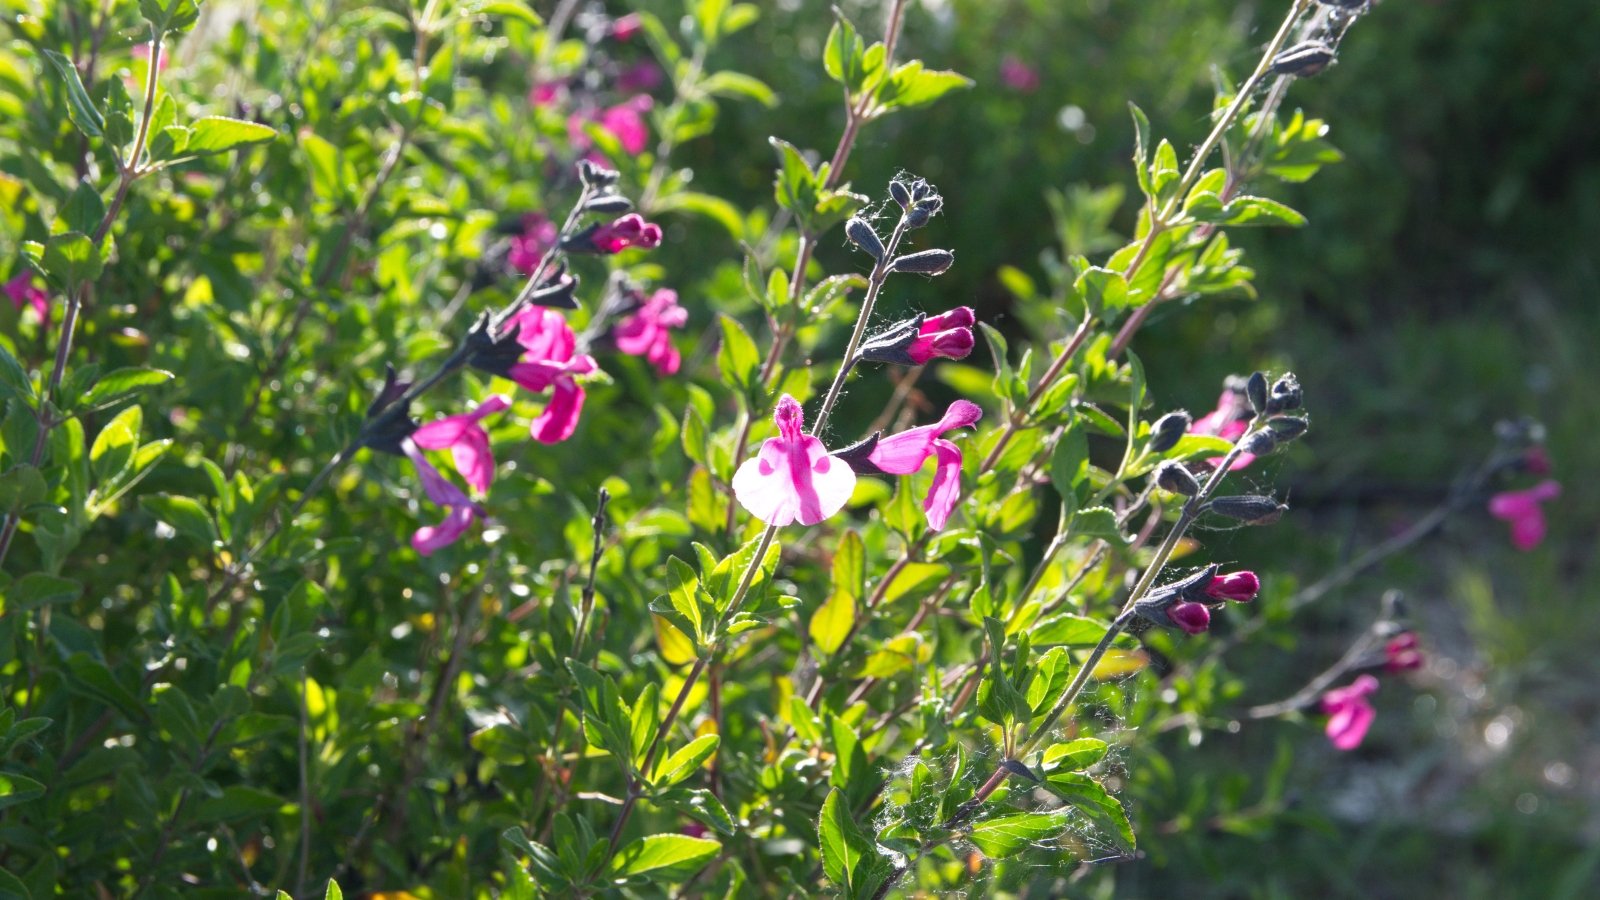 Salvia greggii showcases slender leaves and clusters of small, tubular flowers in shades of pink, creating a vibrant and pollinator-friendly addition to the sunny landscape.